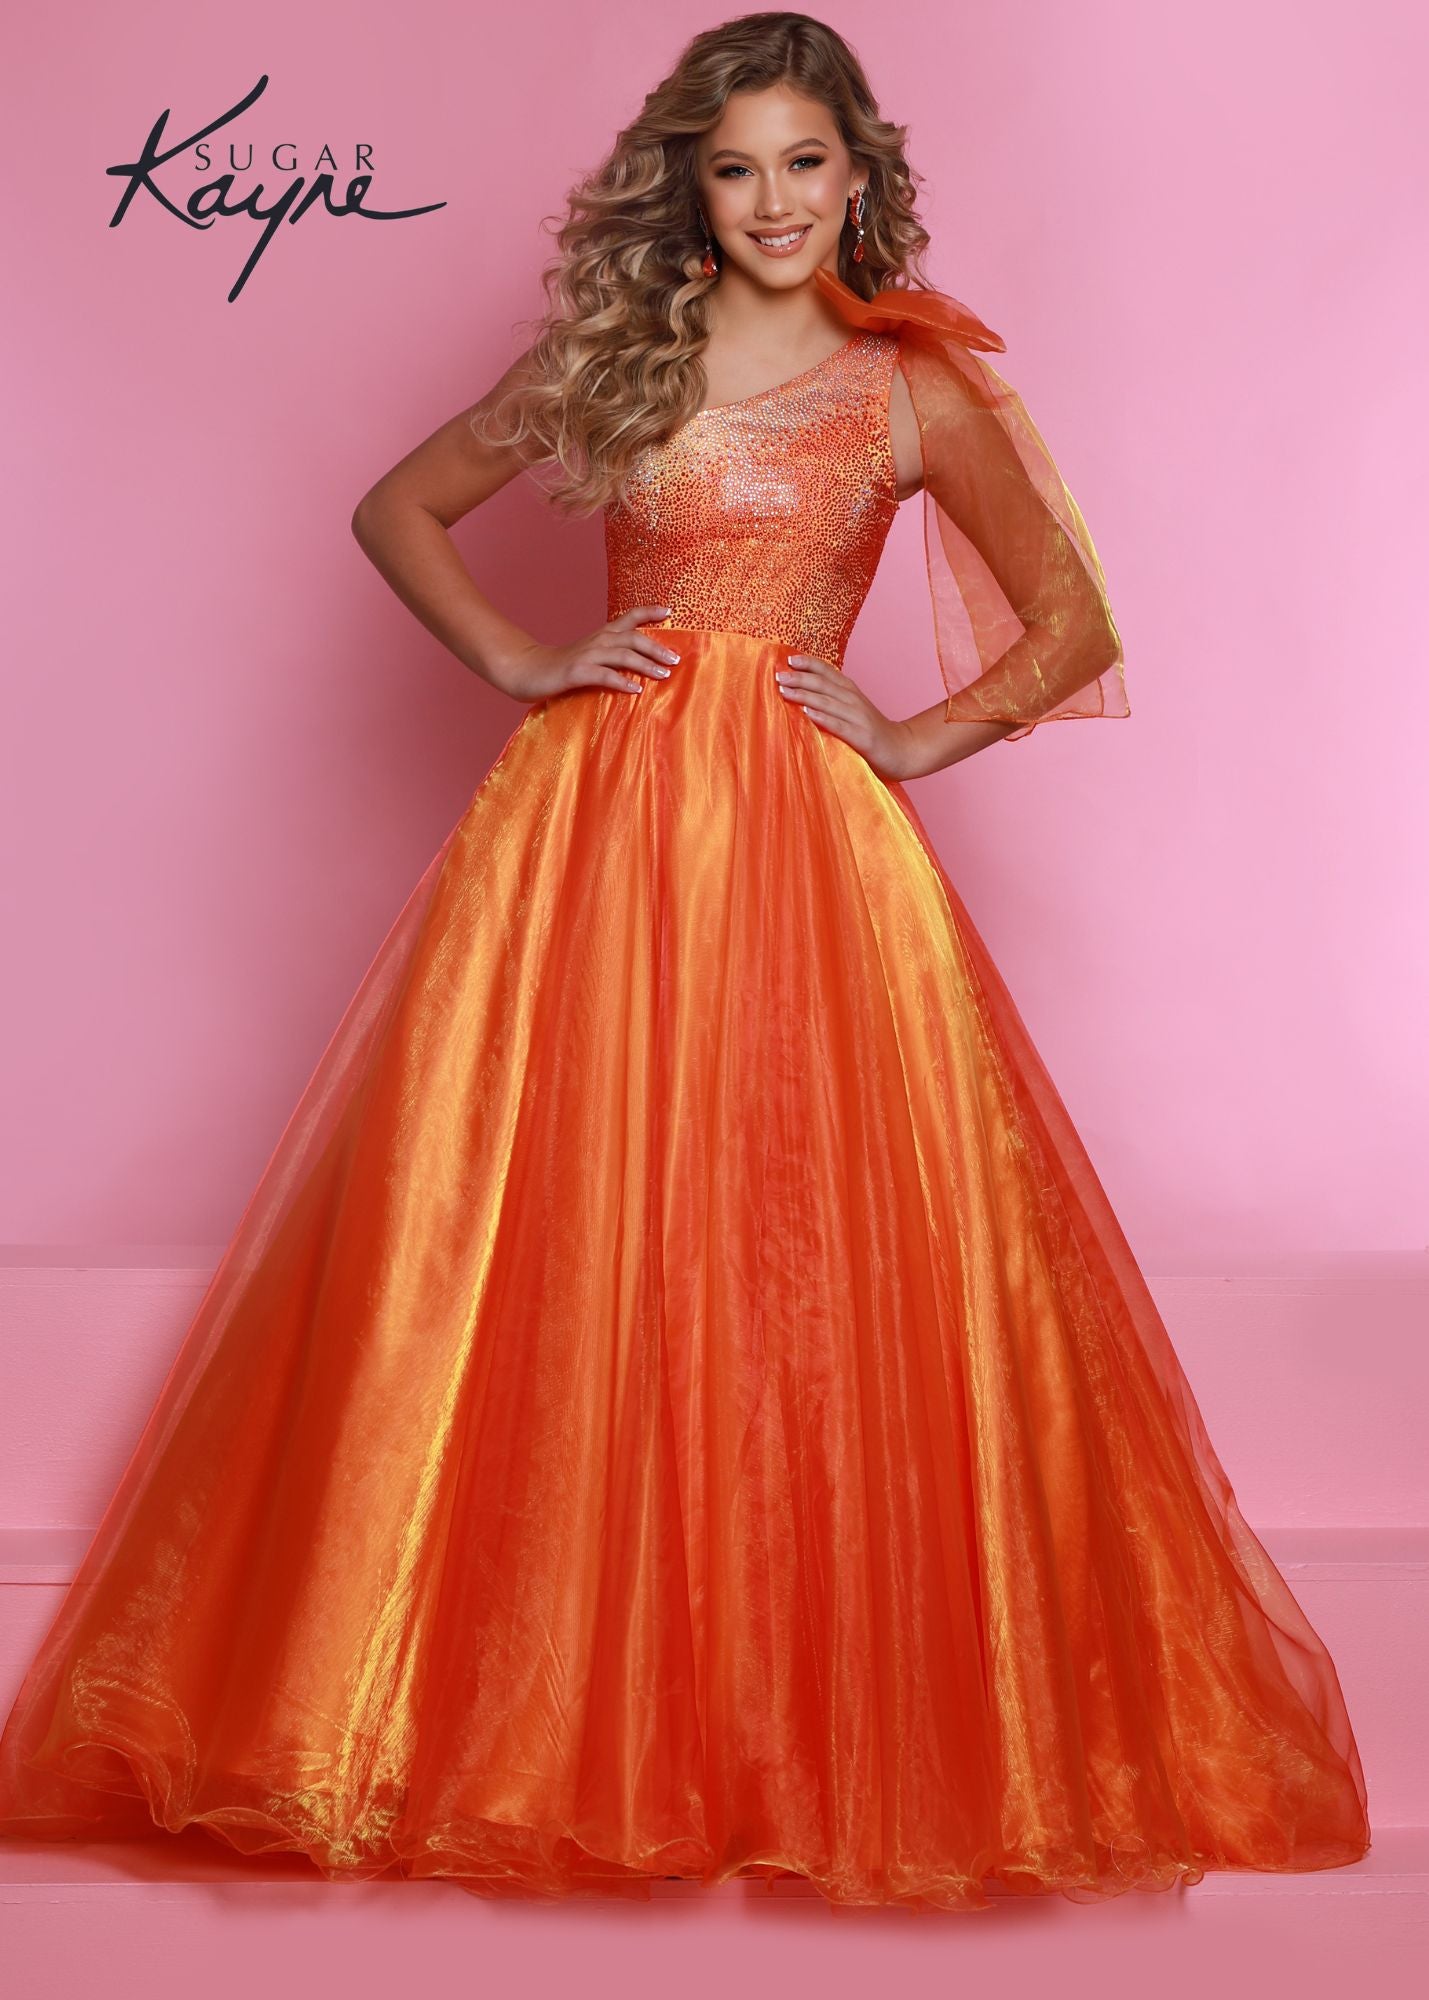 Sugar Kayne C310 Girls One Shoulder Bow A Line Shimmer Pageant Dress Crystal Gown  Go ahead and take a BOW in this lovely one-shoulder organza ballgown. The ombre beaded bodice brings all the dazzle!  Colors: Orange, Yellow, Blue  Sizes: 2, 4, 6, 8, 10, 12, 14, 16  Fabric Organza, Mesh, Satin Lining